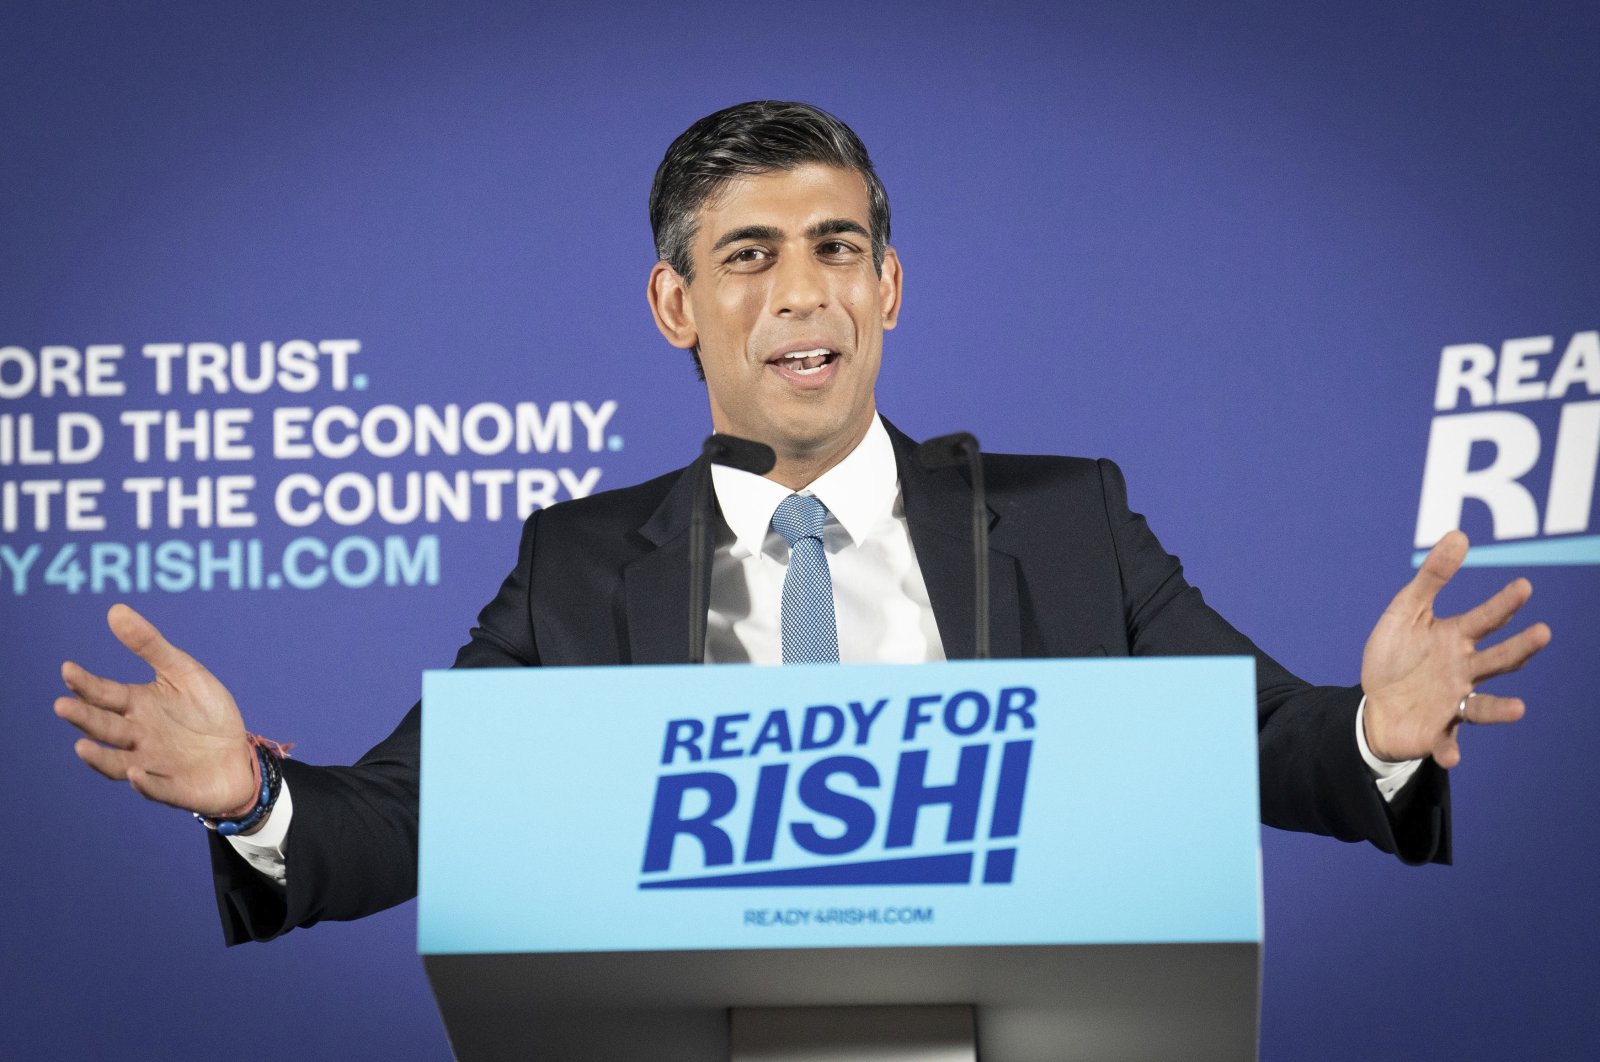 British Treasury chief Rishi Sunak speaks at the launch of his campaign to be Conservative Party leader and prime minister, at the Queen Elizabeth II Centre in London, Tuesday, July 12, 2022. (AP Photo)